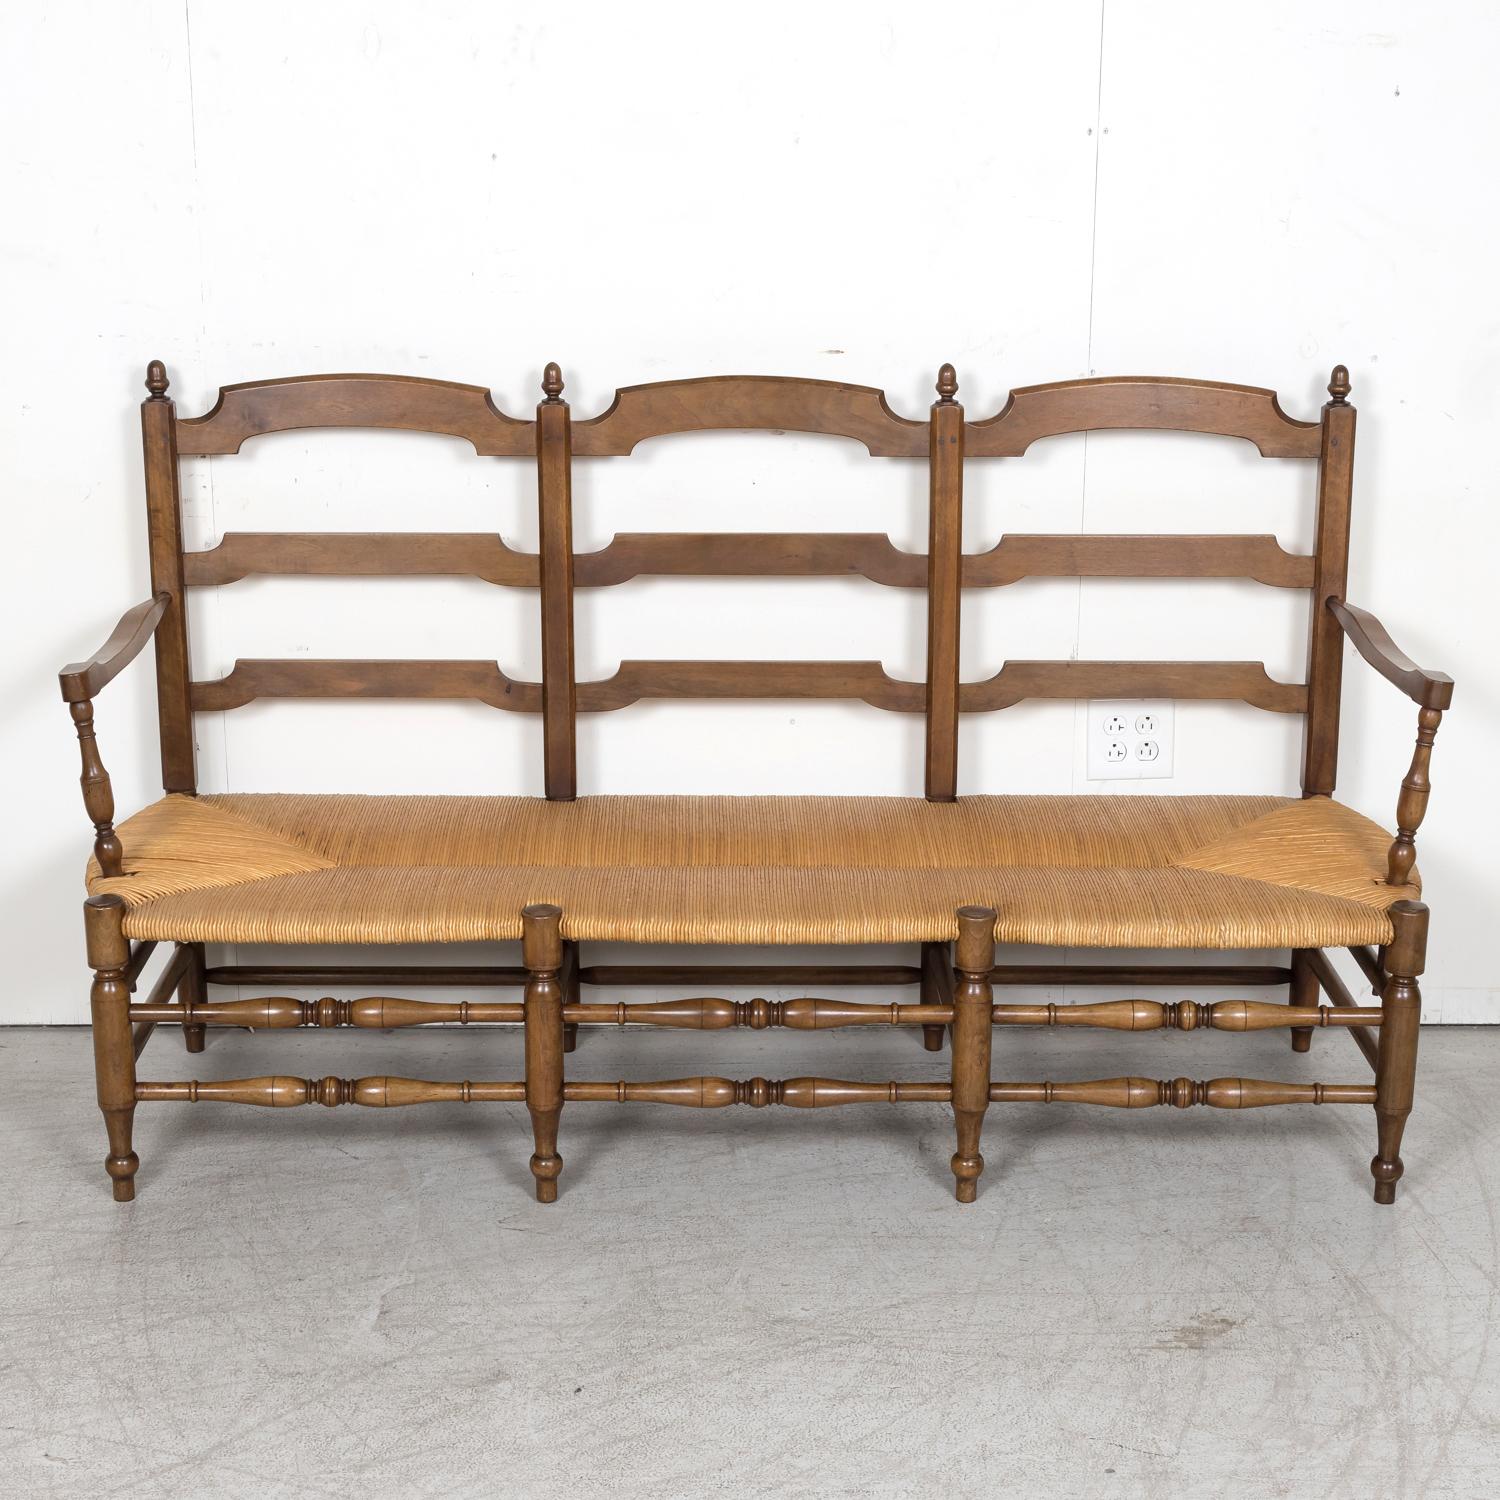 A 19th century French Country ladder back radassier or settee handcrafted in walnut, circa 1890s. This double arm Provençal bench seats three and features a handwoven rush seat and ladder-back. Raised on turned legs with stretchers. A wonderful,